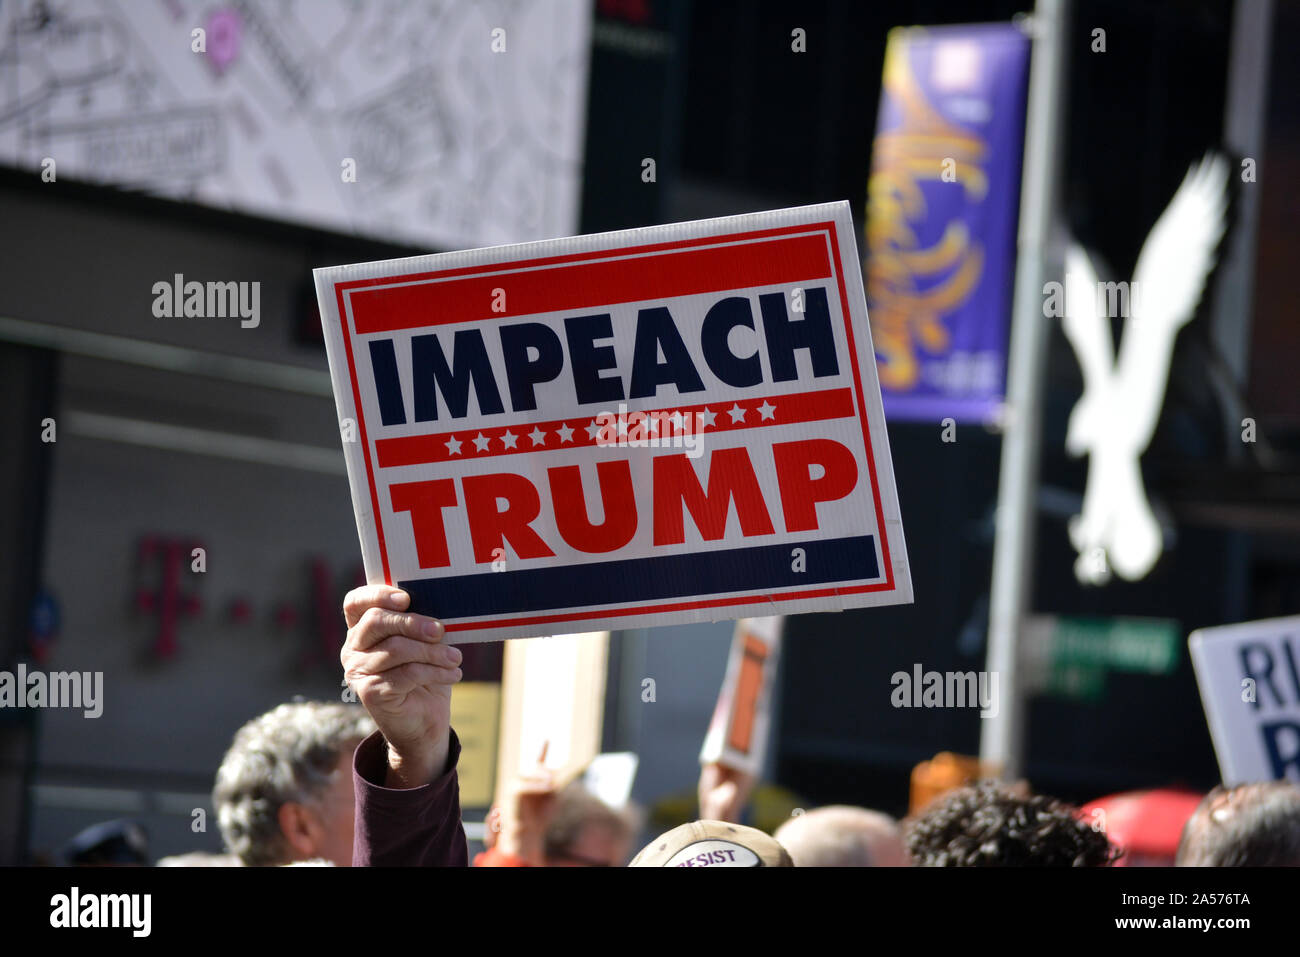 Rally for the impeachment of President Trump in Times Square, New York City. Stock Photo